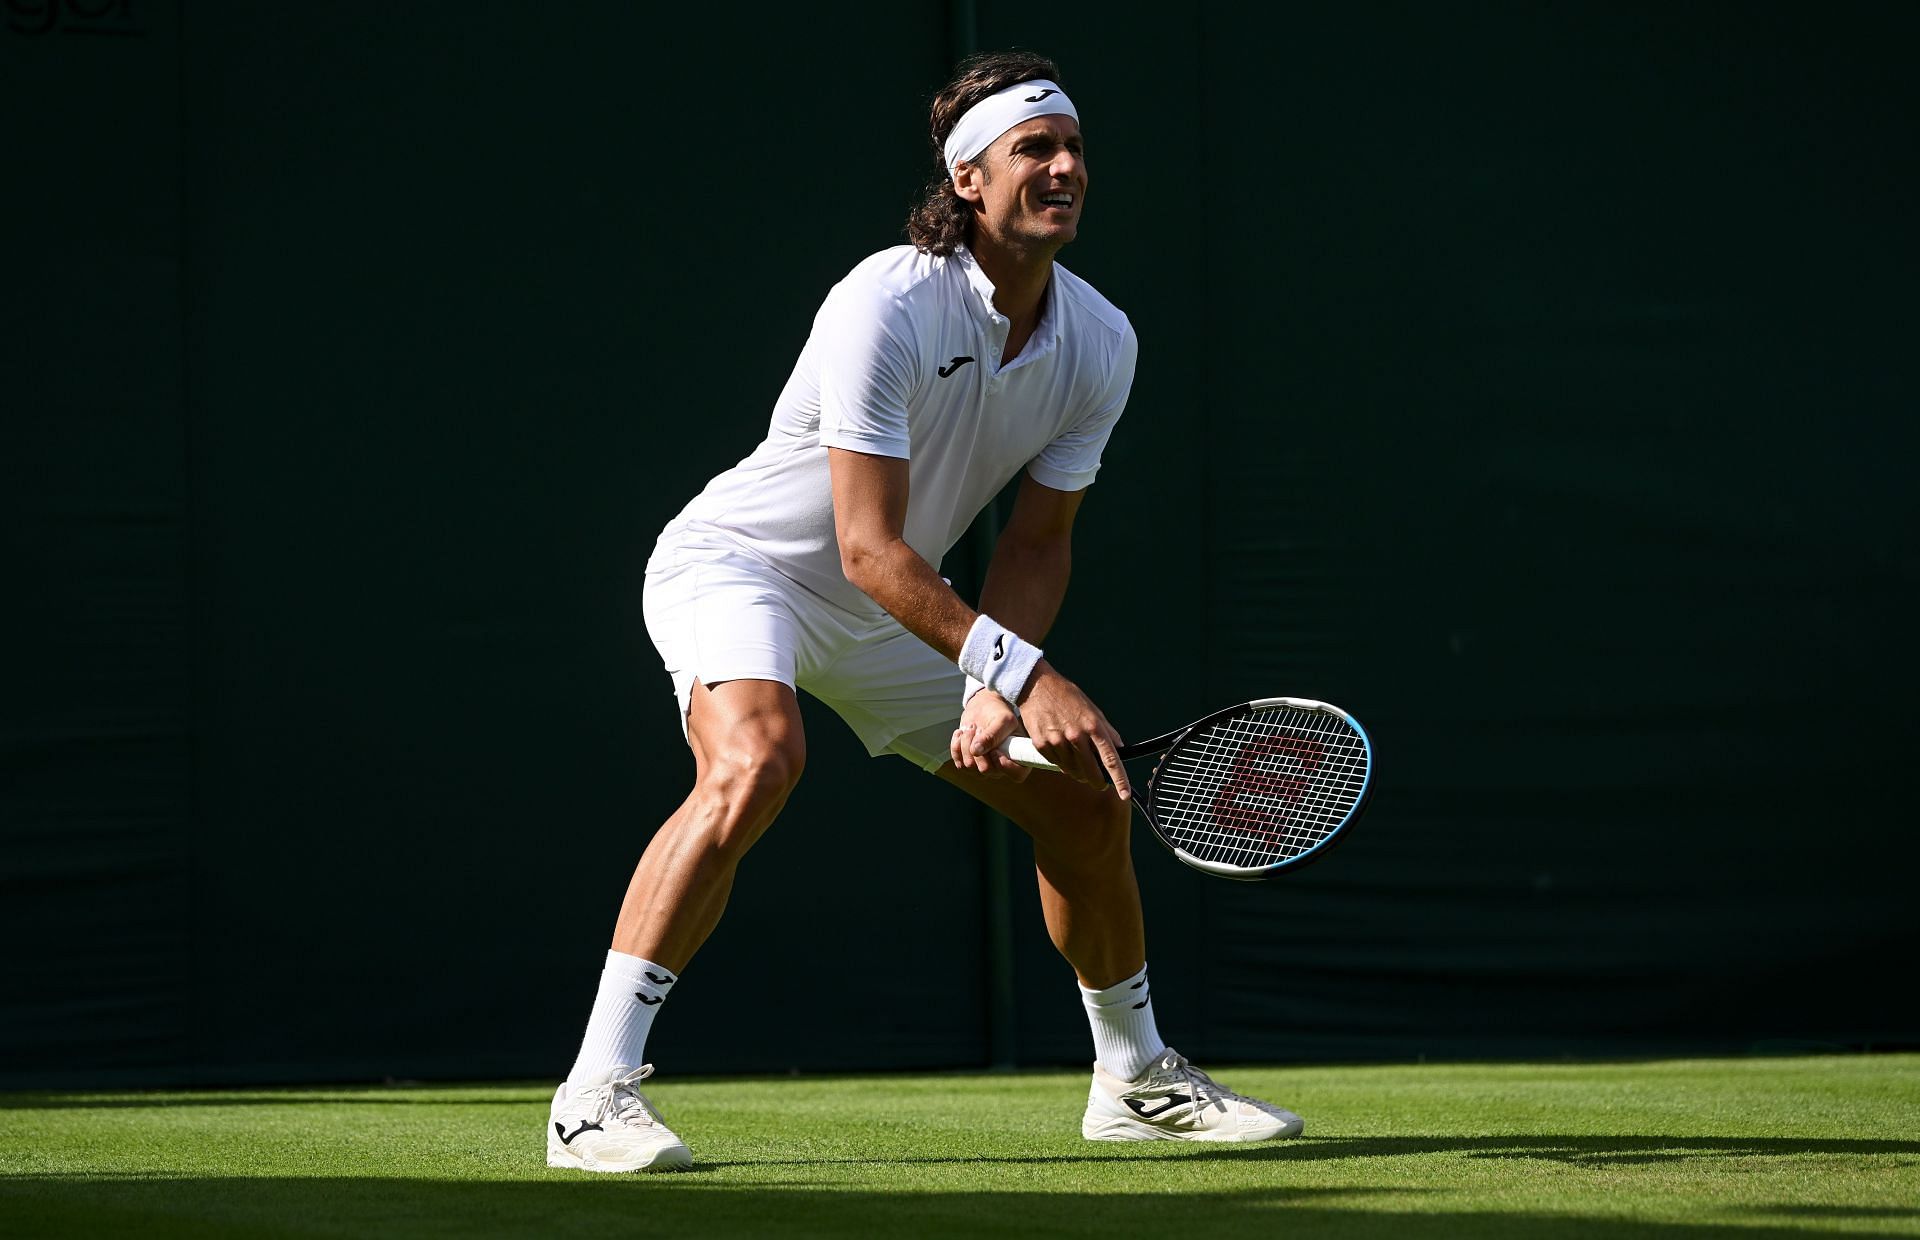 Feliciano Lopez at the 2022 Wimbledon Championships.